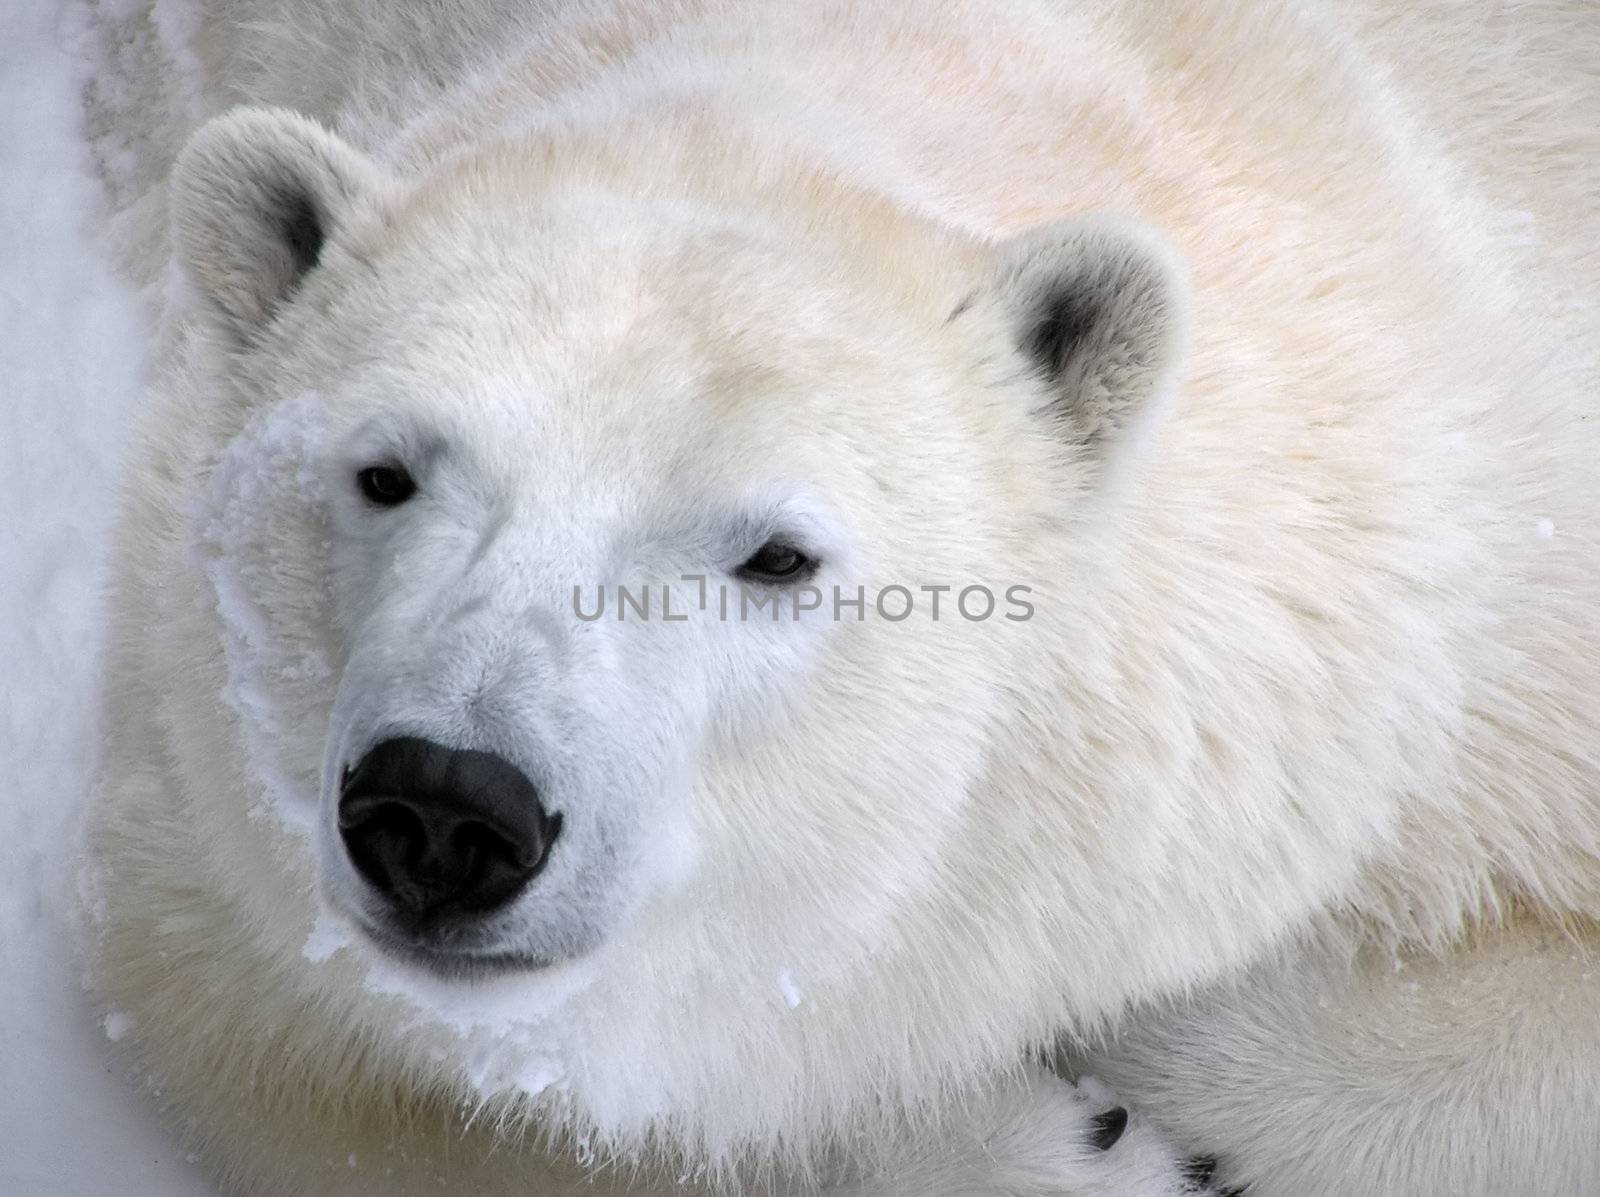 Low-key portrait of a peaceful polar bear curled up in the snow ready to take a nap, with details fur and claws showing.  